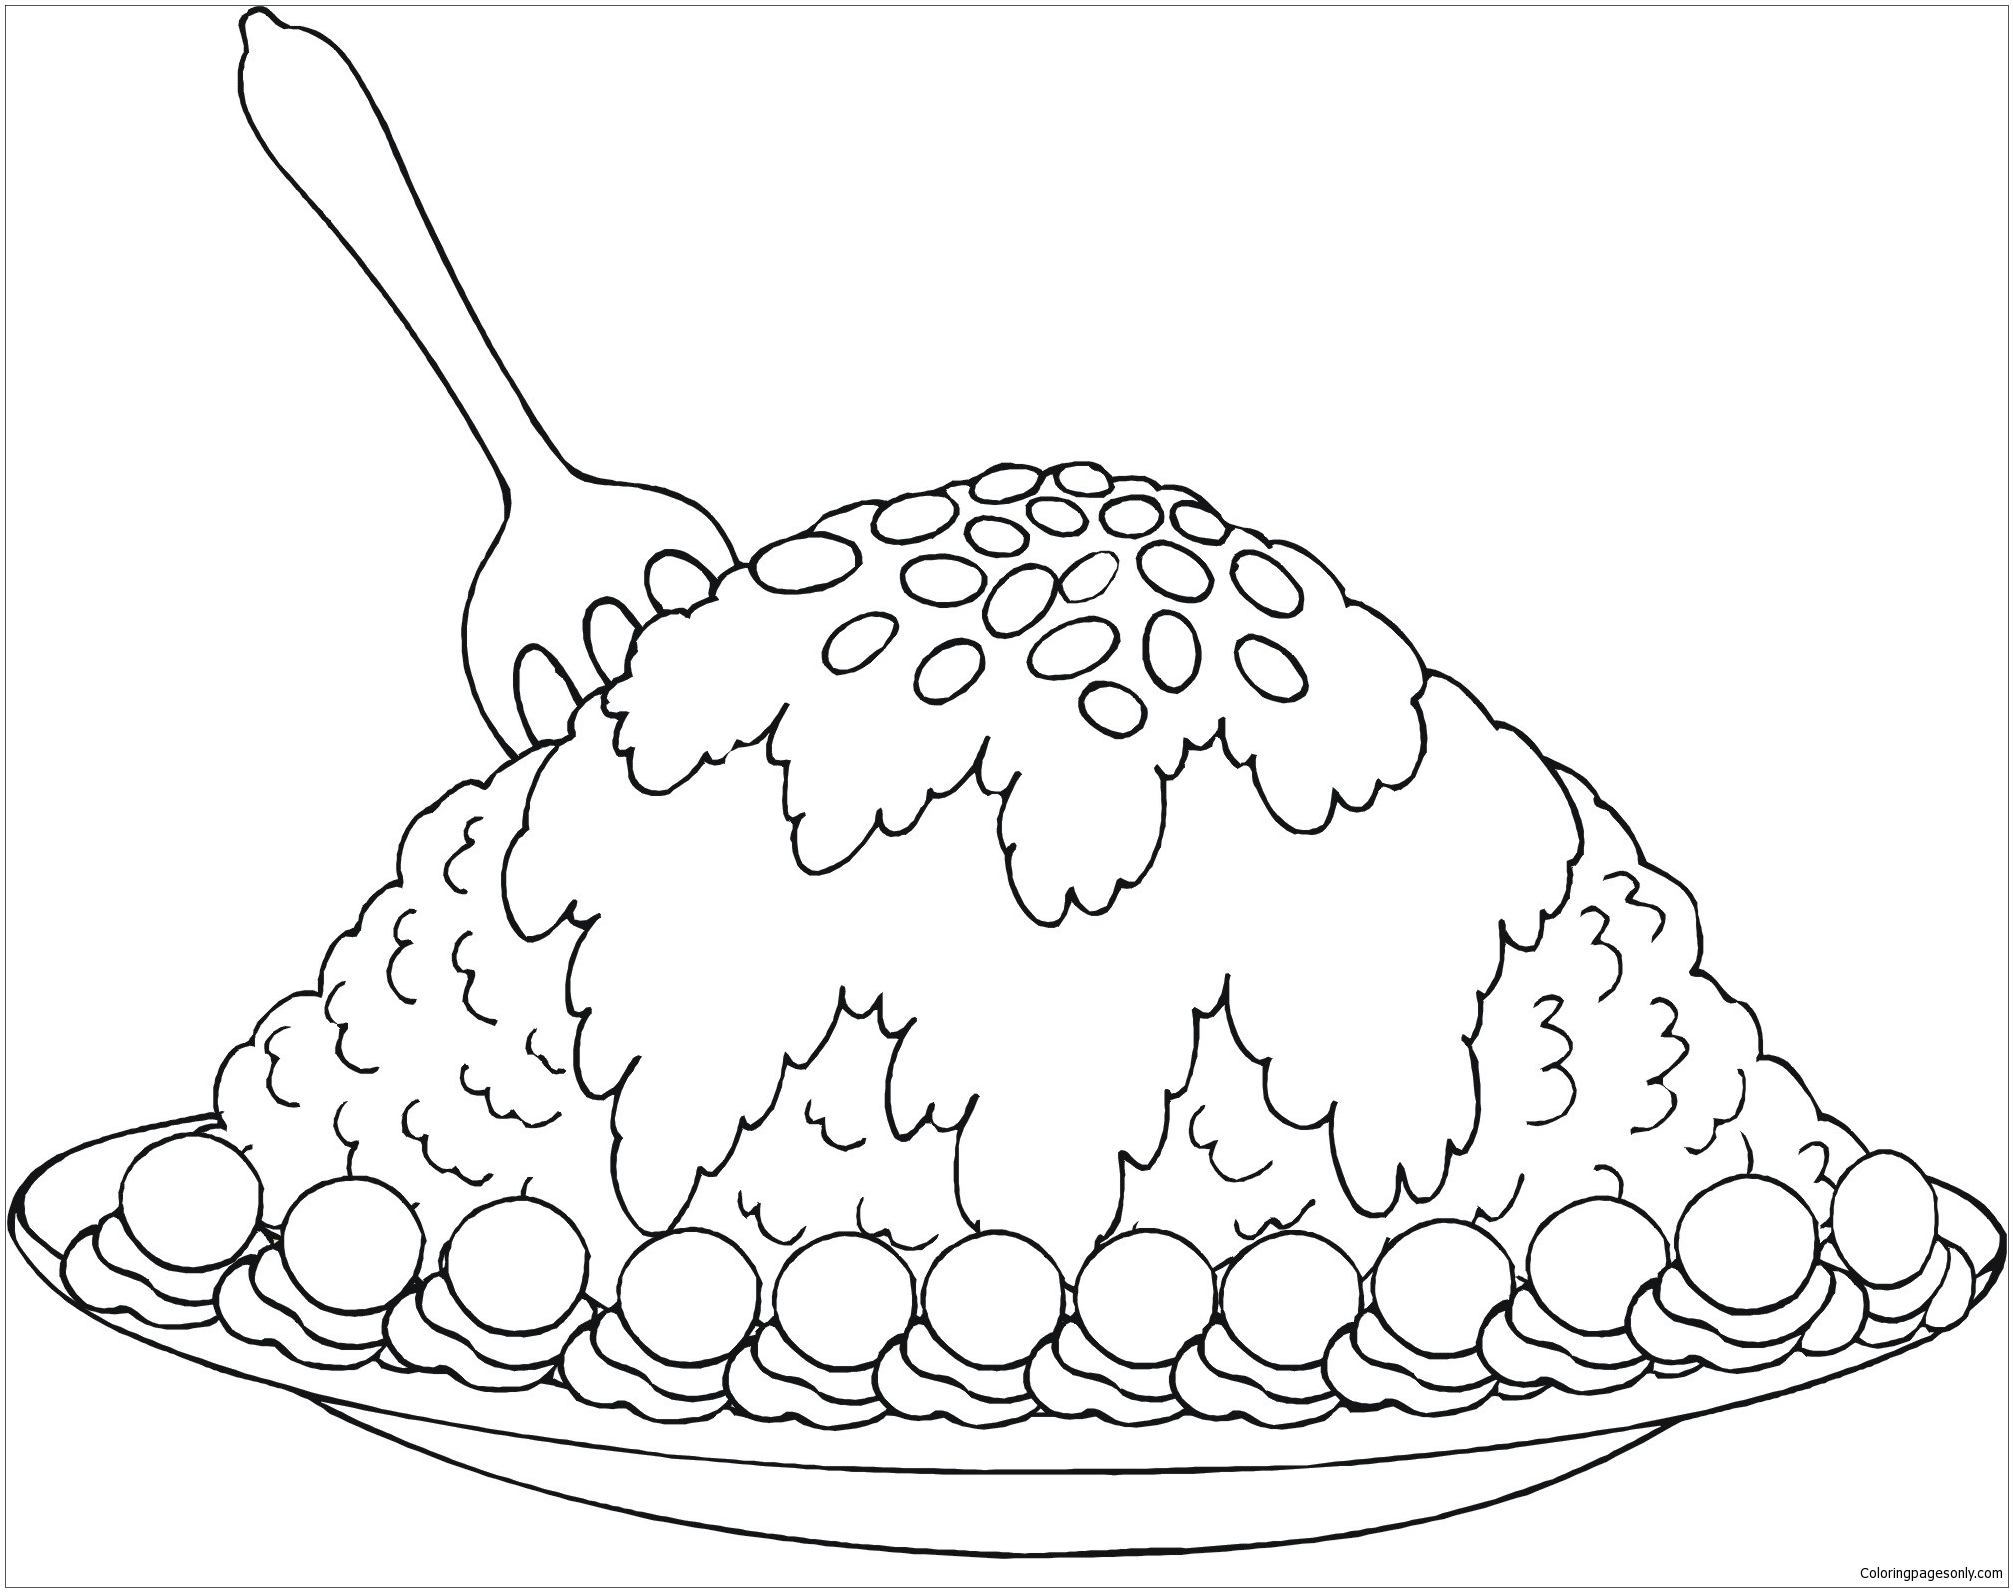 New Fabulous Dessert Coloring Page - Free Coloring Pages Online